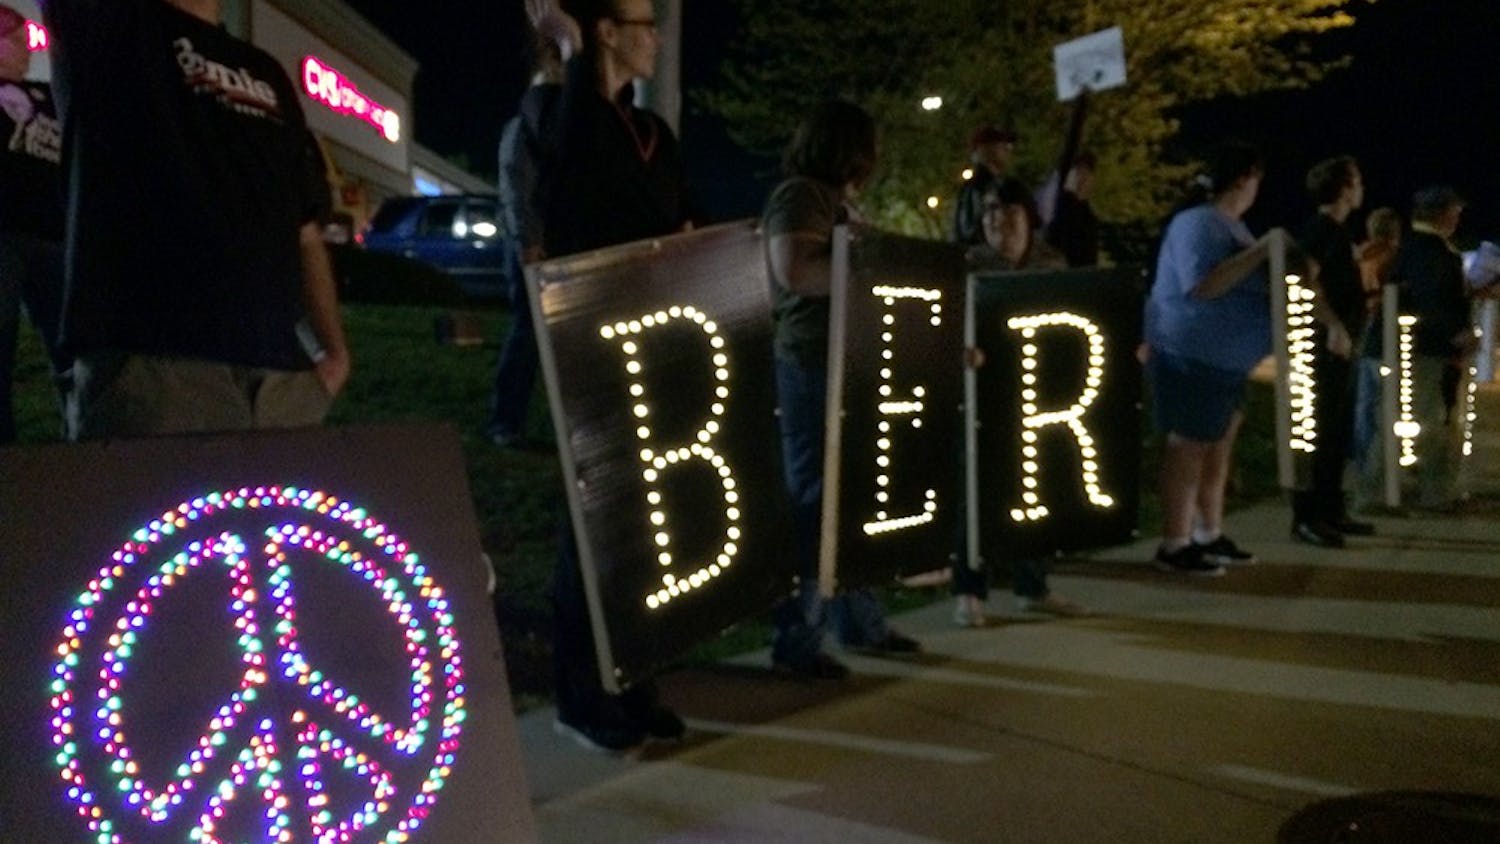 Bernie Sanders' supporters hold lighted signs spelling 'Bernie' on the corner of SR 46 and Third Street Saturday night.